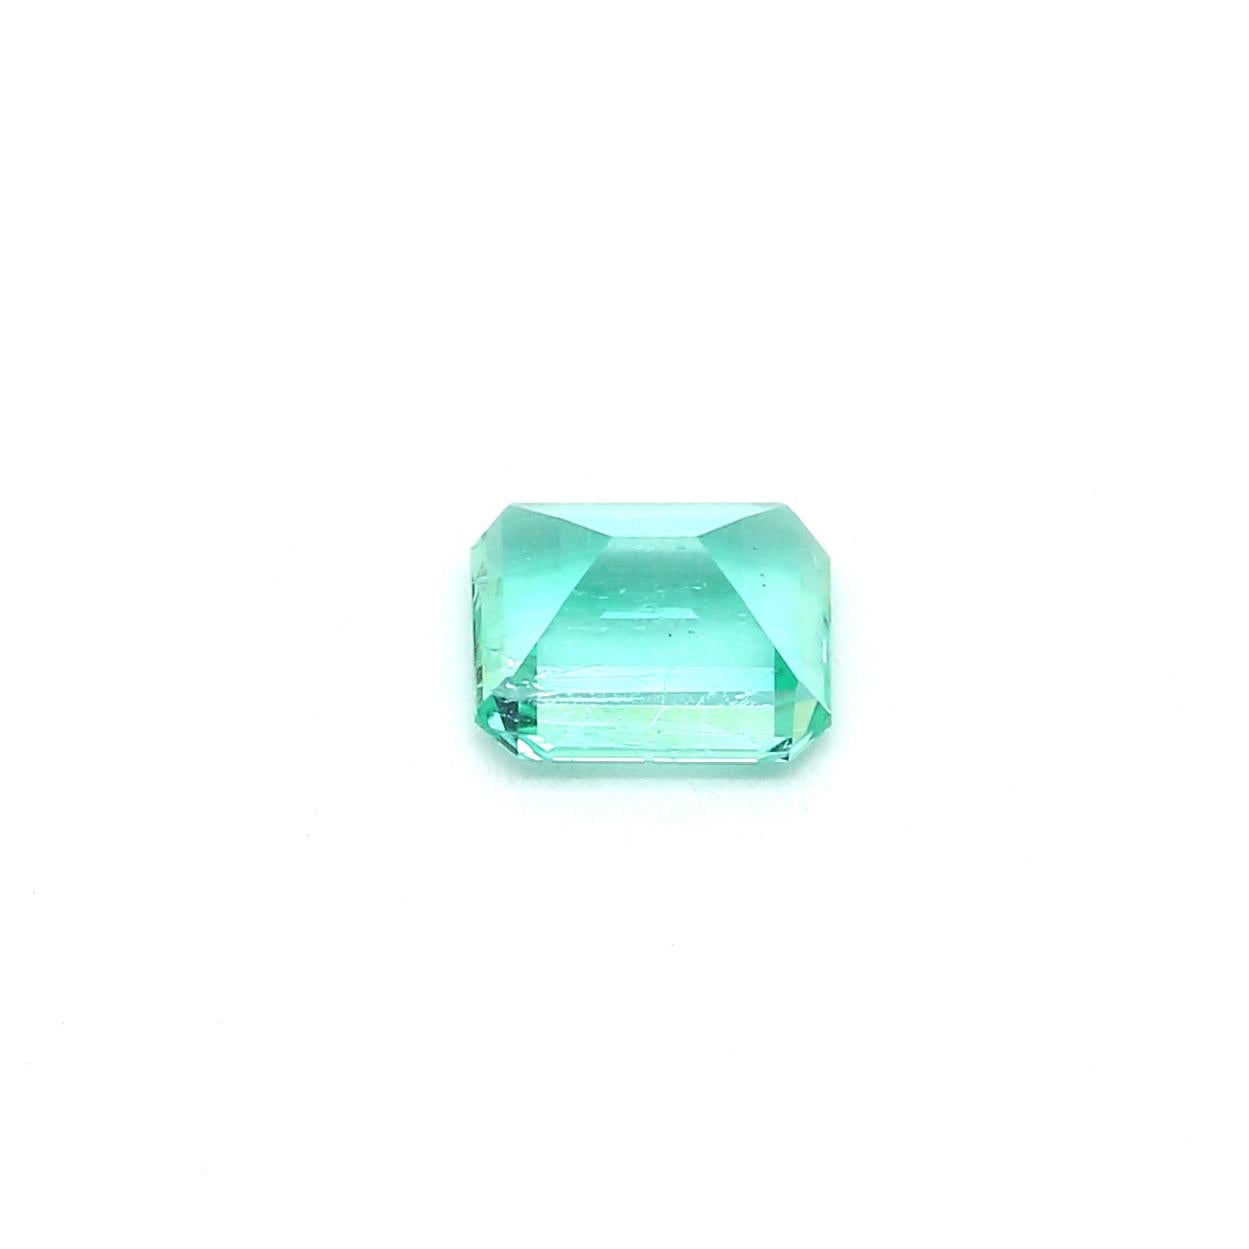 An amazing Russian Emerald which allows jewelers to create a unique piece of wearable art.
This exceptional quality gemstone would make a custom-made jewelry design. Perfect for a Ring or Pendant.

Shape - Octagon
Weight - 0.84 ct
Treatment - Minor